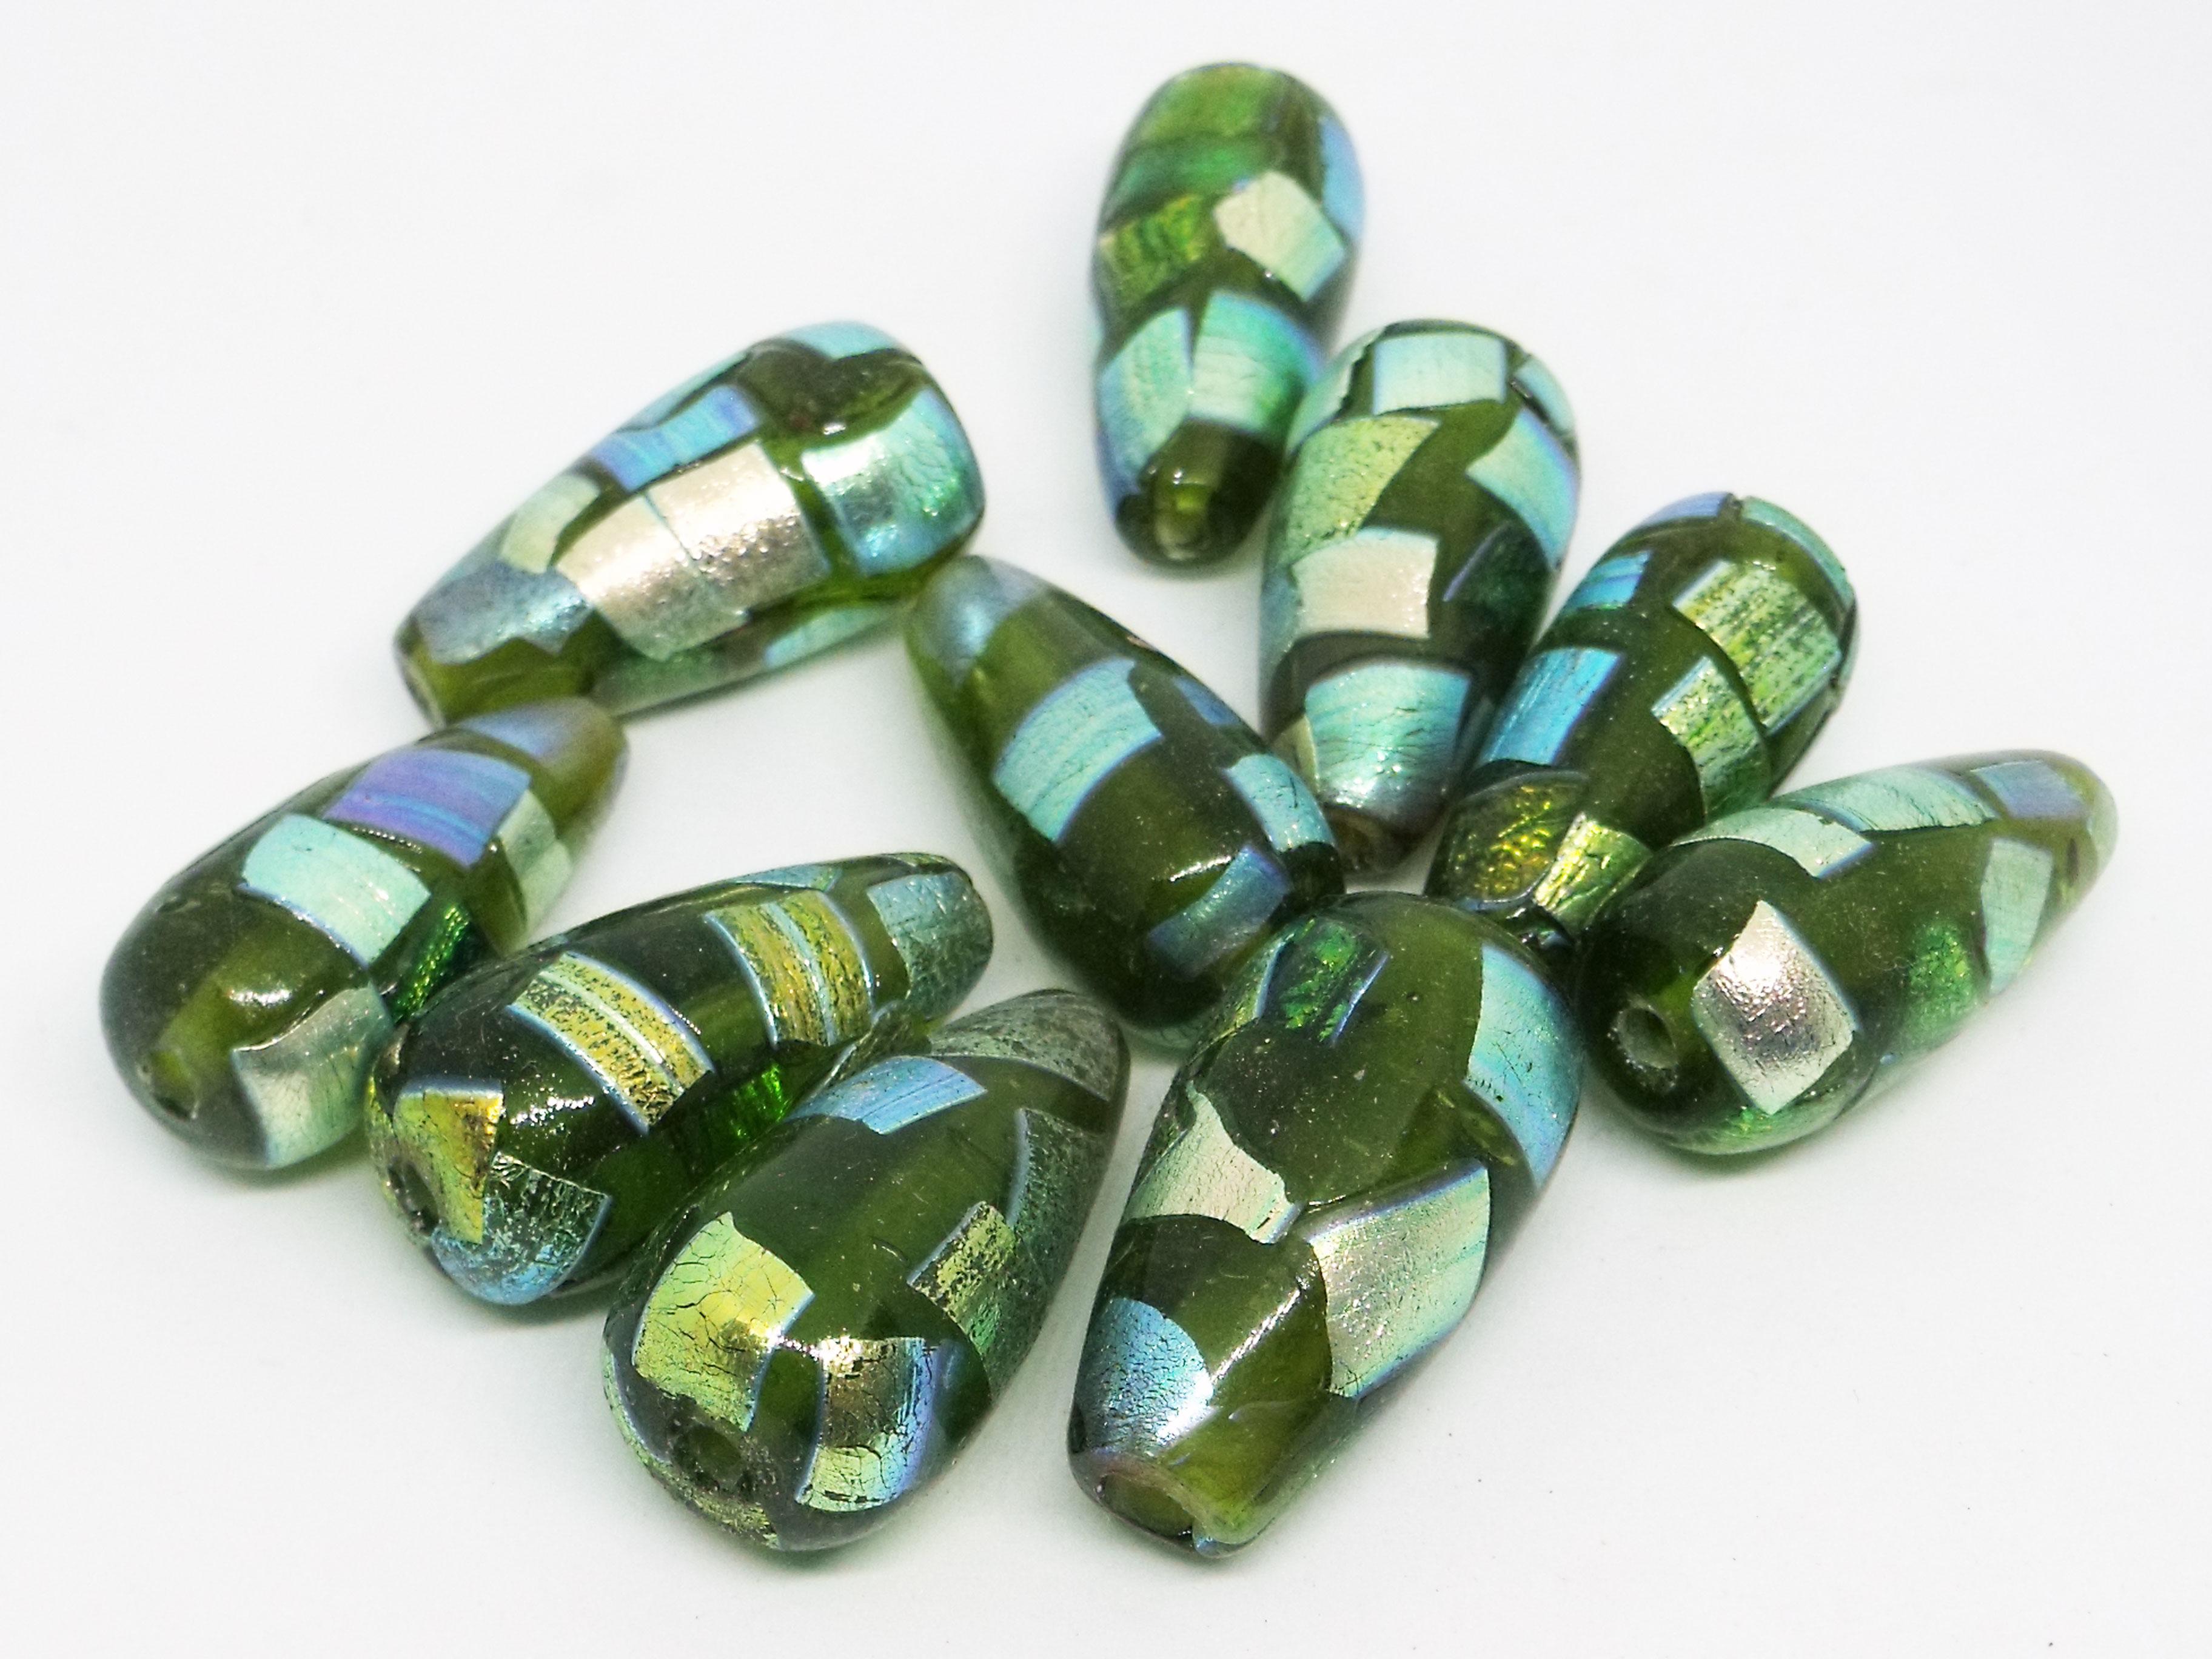 29x12mm Tapered Glass Teardrop Bead - Clear Green with Dichroic Foil Pattern